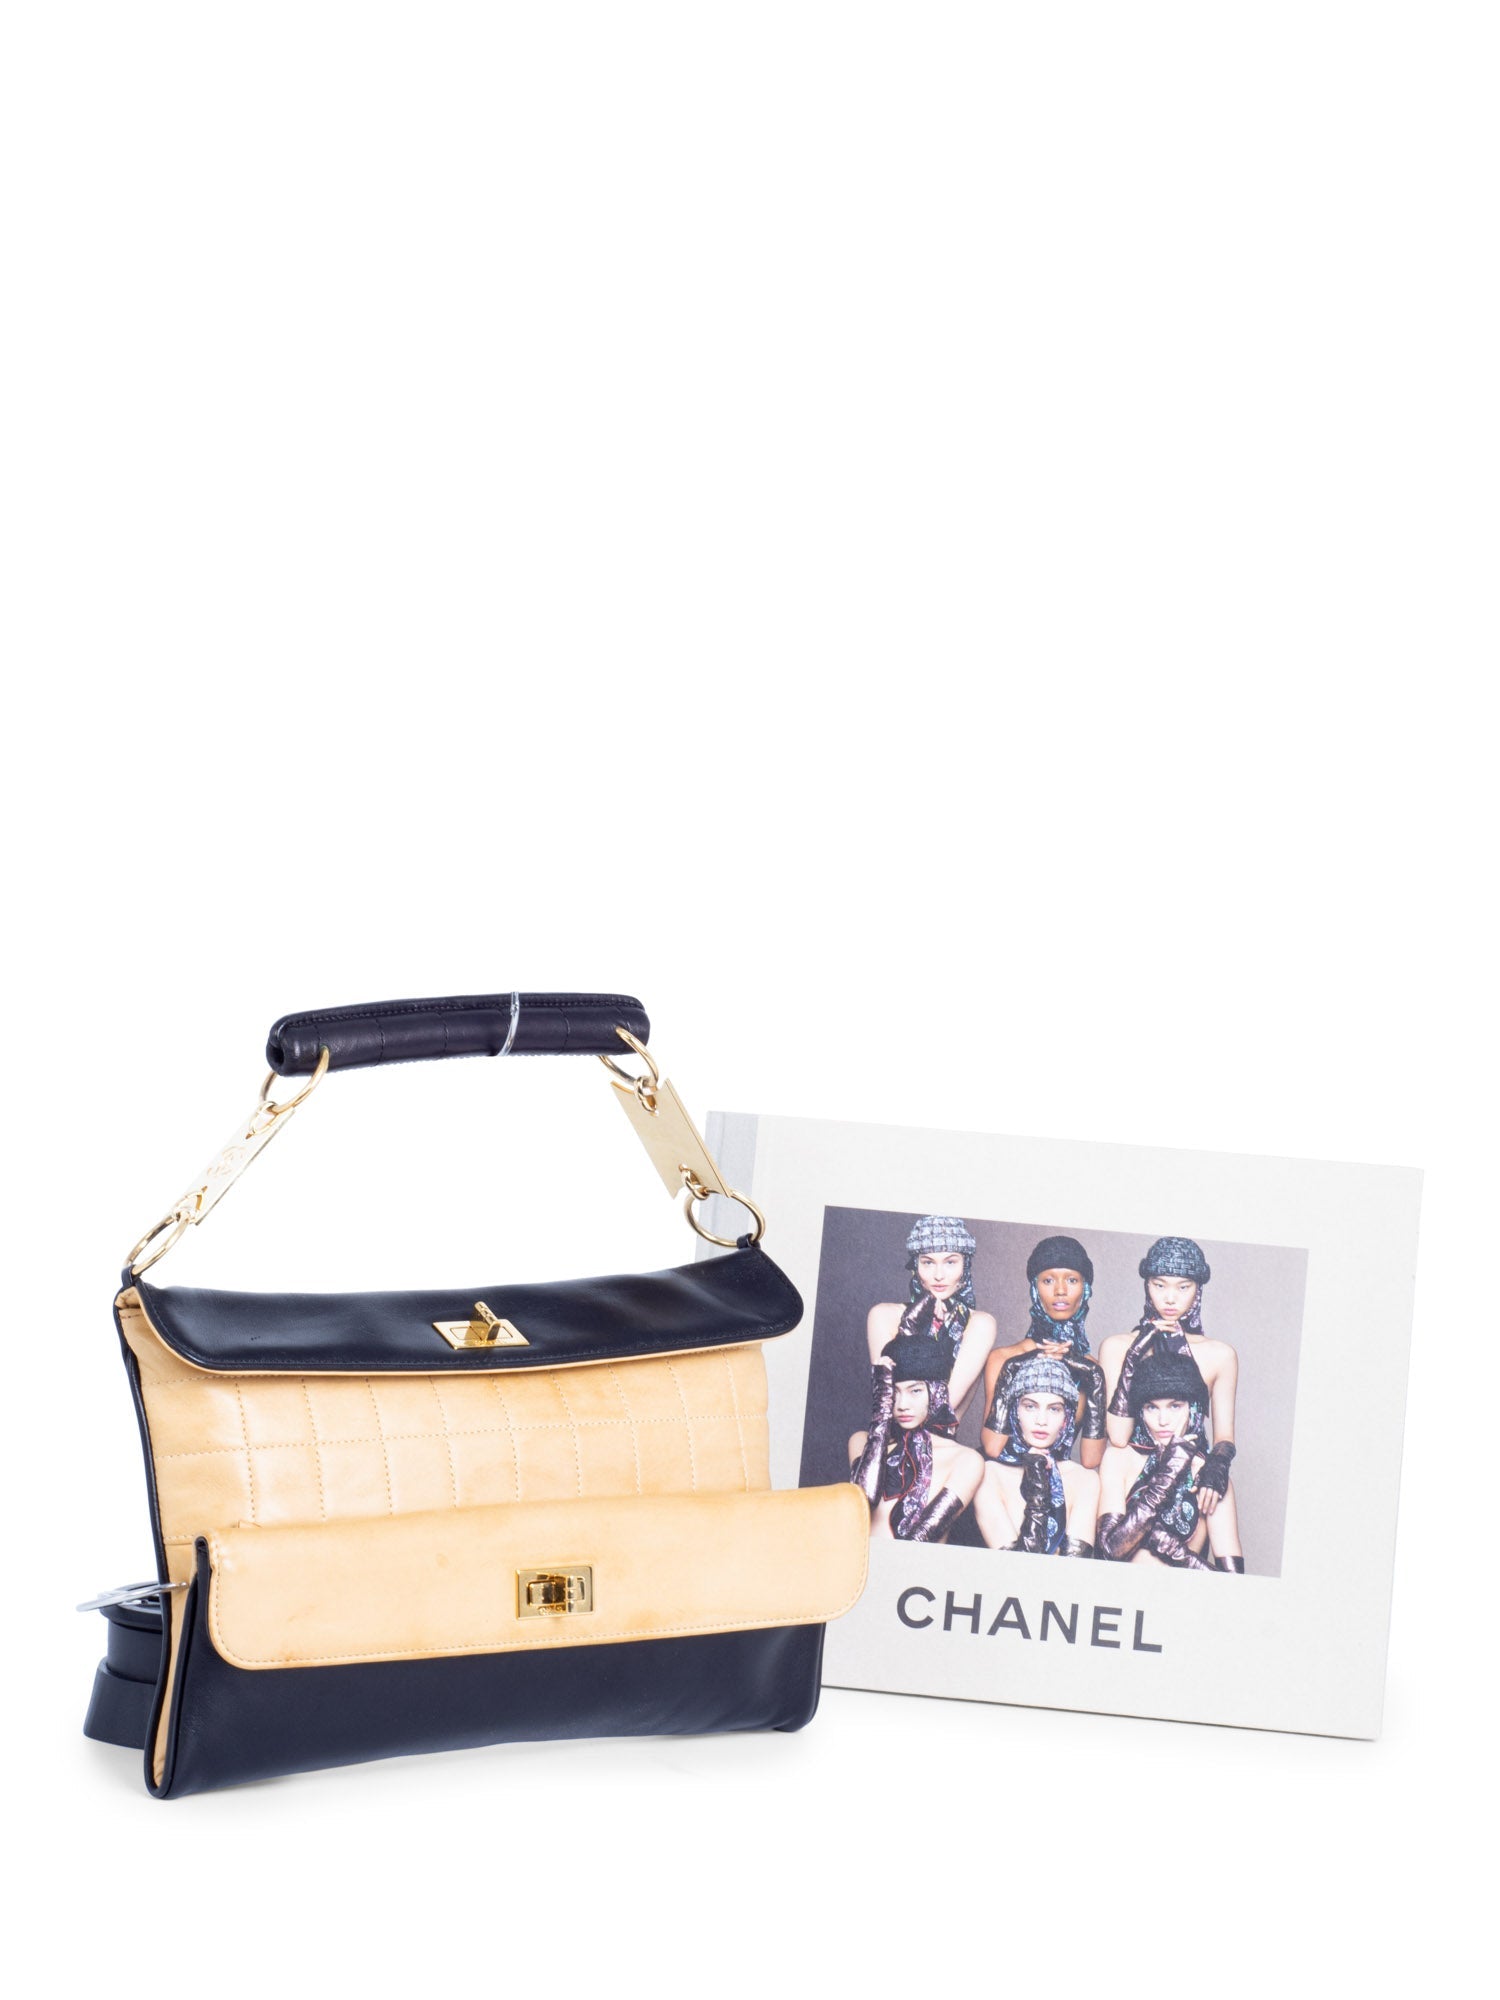 CHANEL AUTHENTICITY CARD +FREE SHIPPING